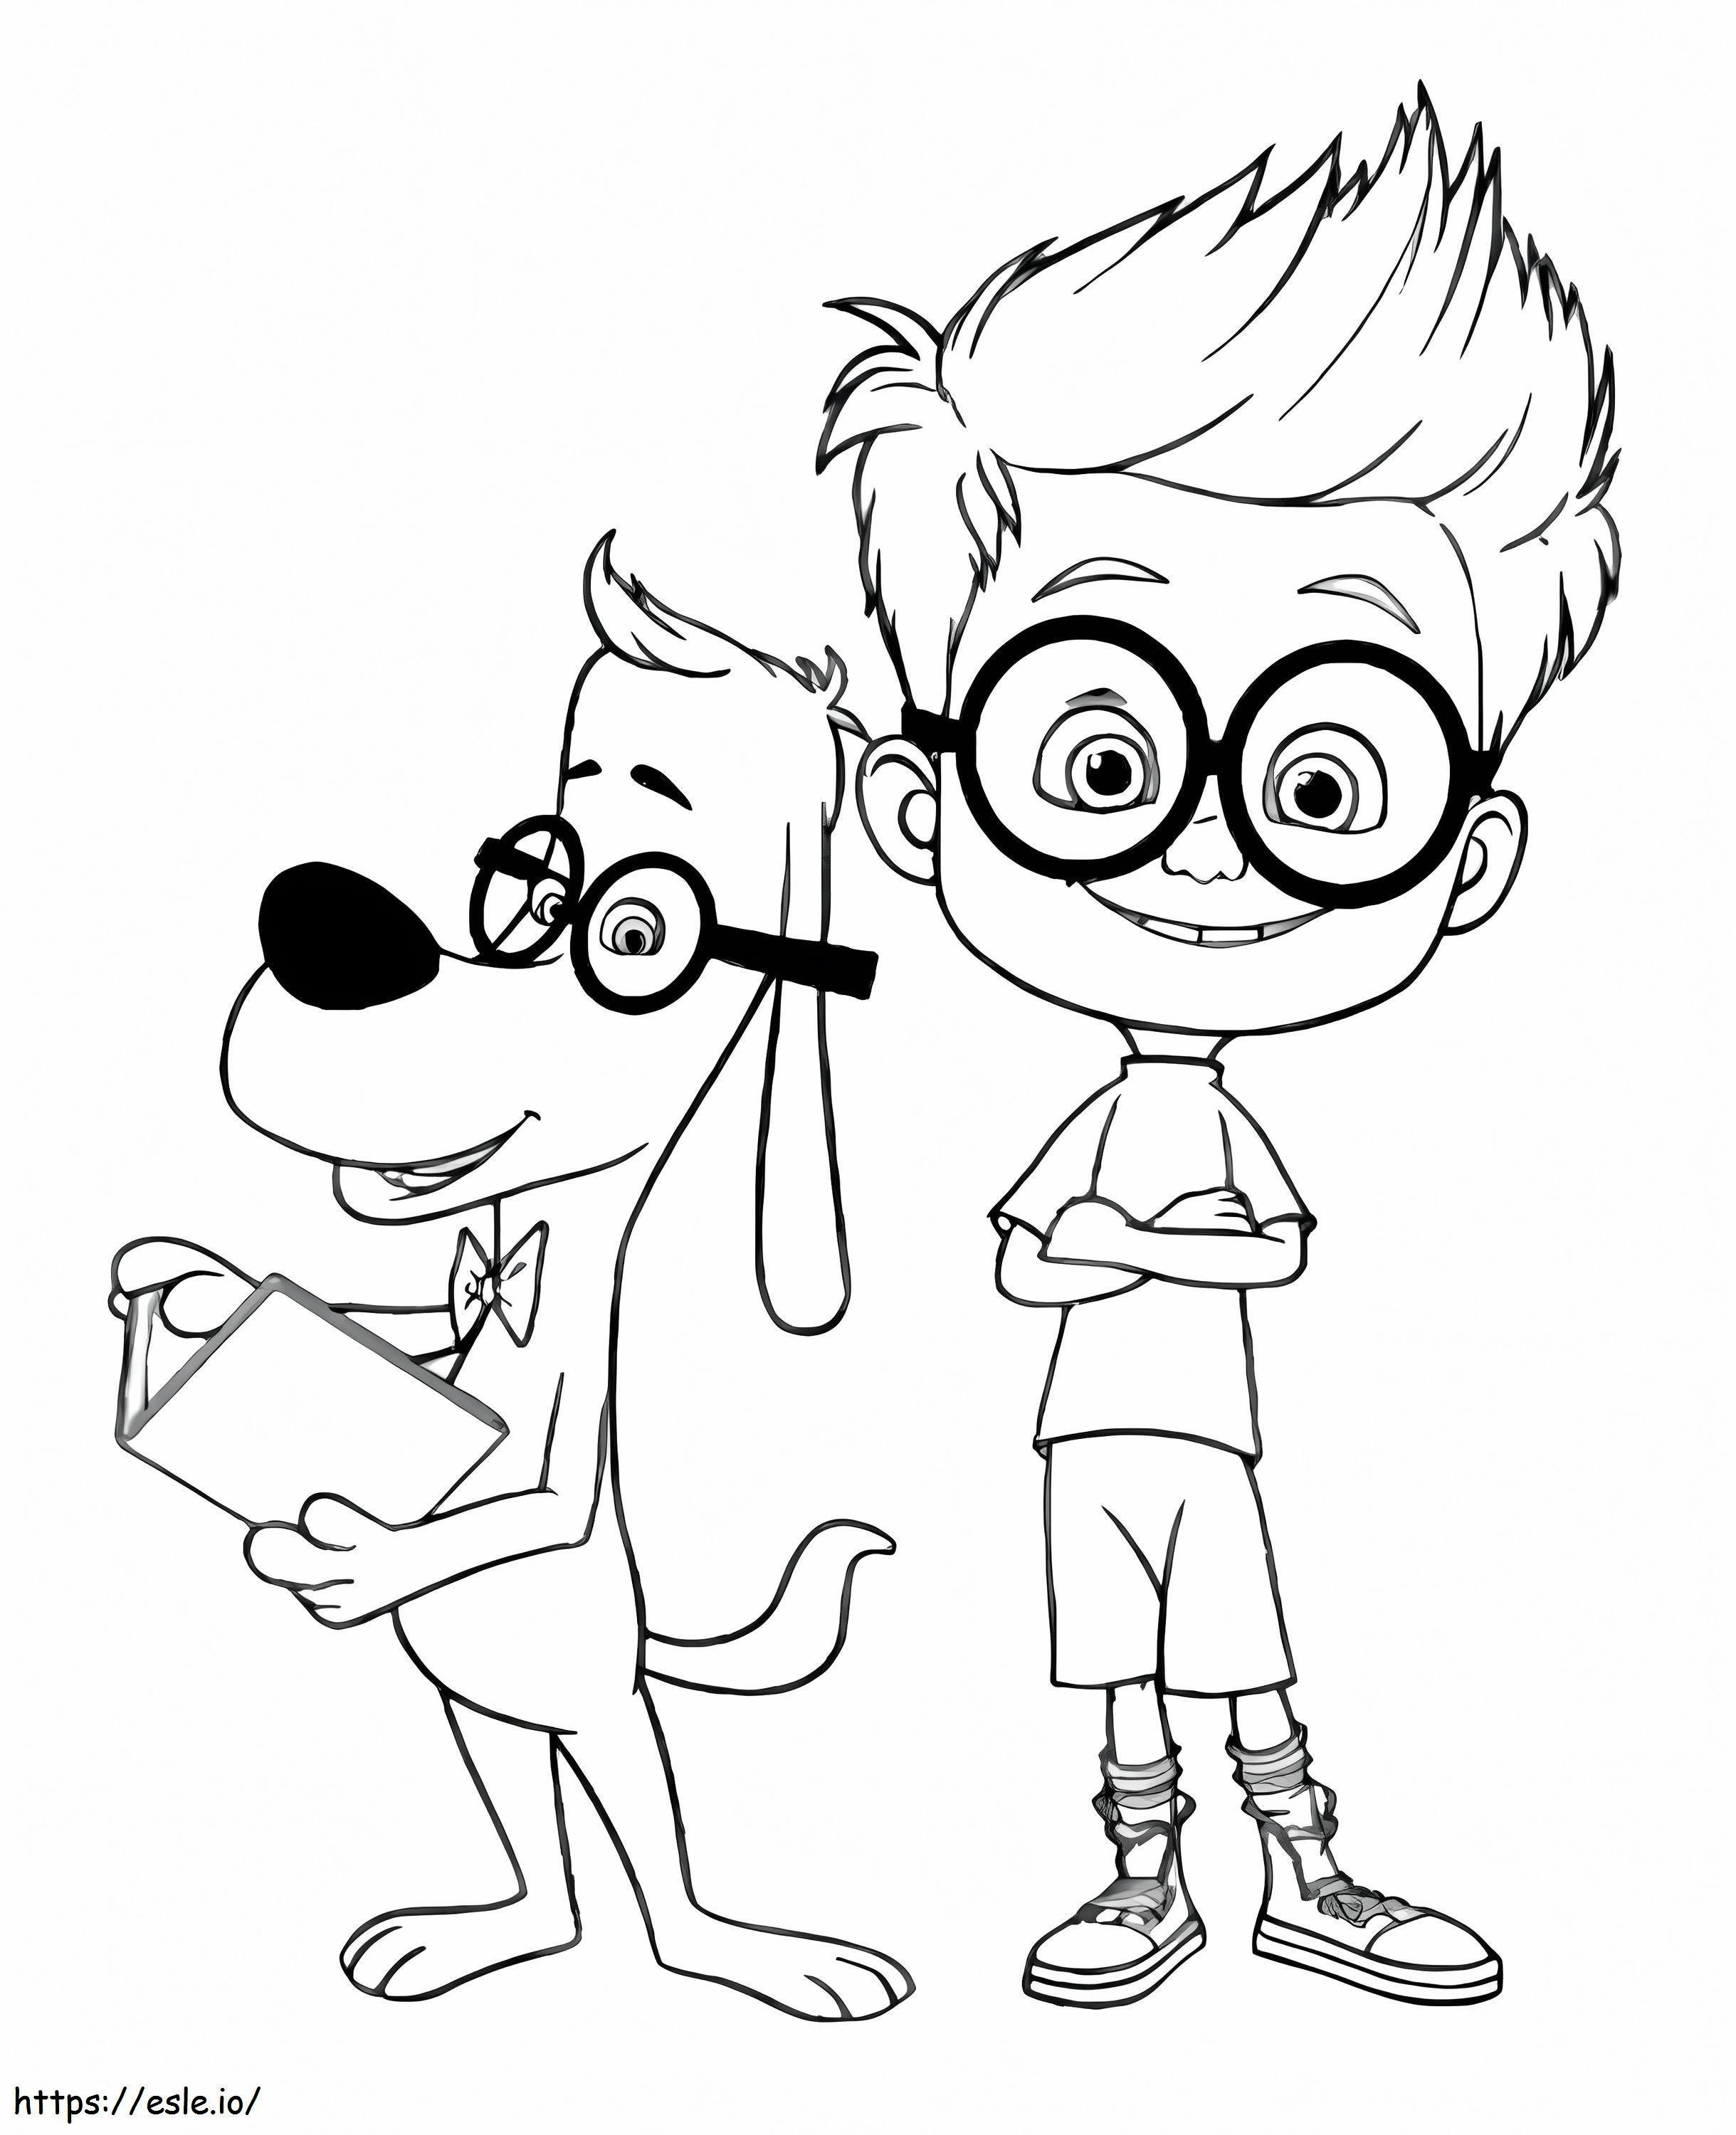 Mr. Peabody And Sherman 1 coloring page